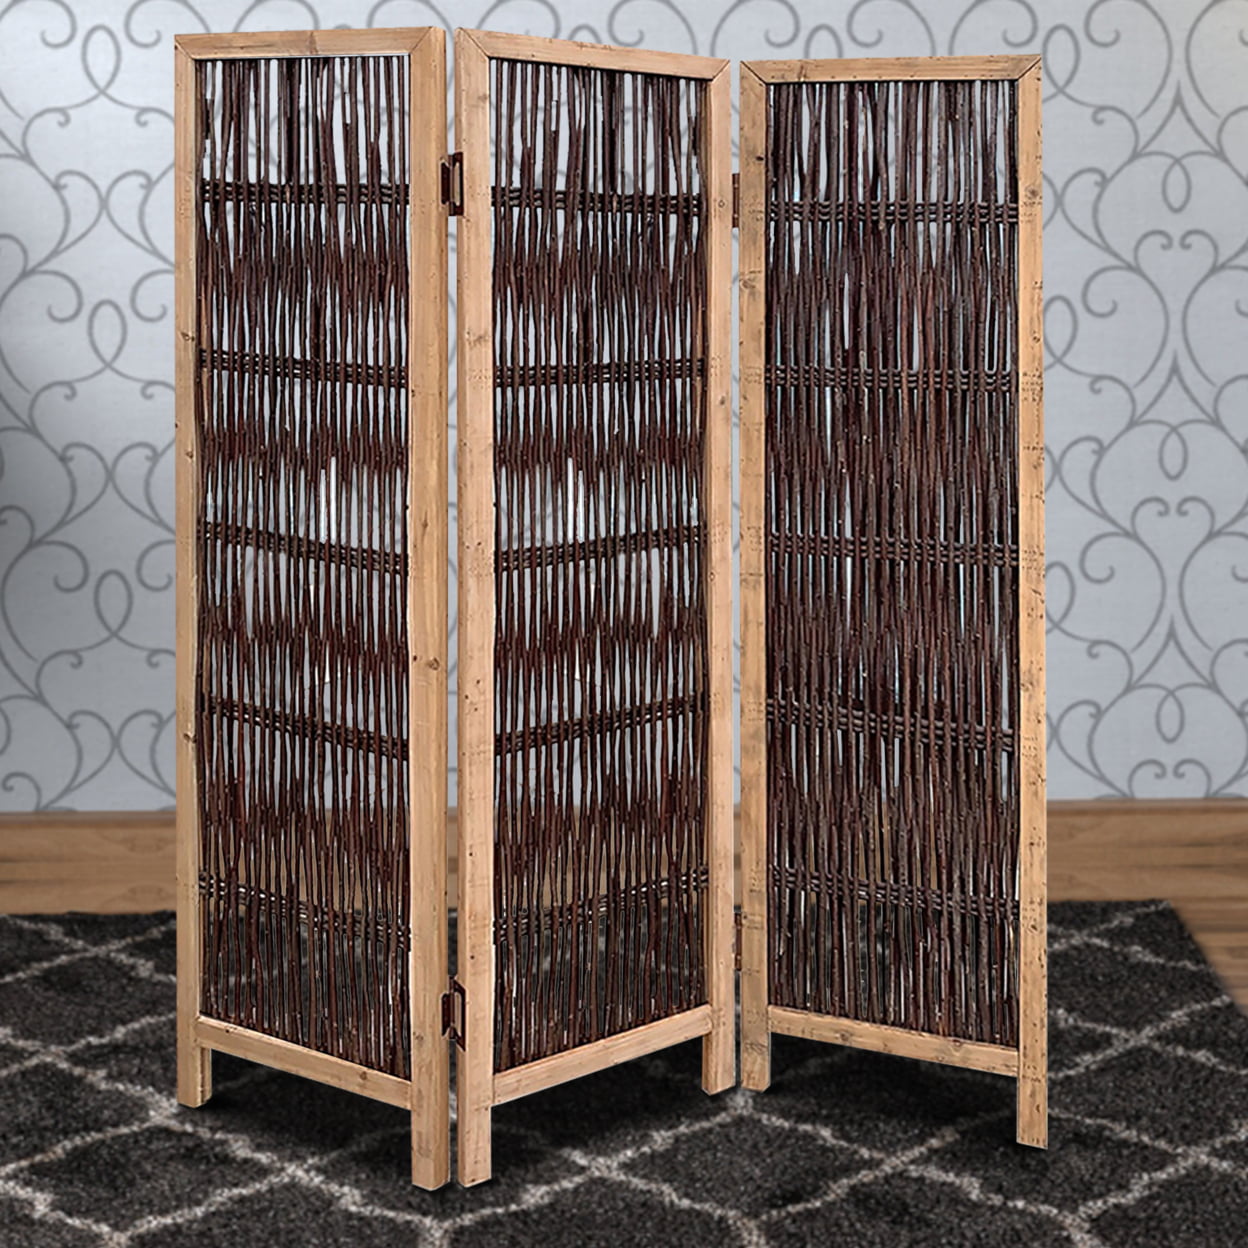 Bm231301 71 In. 3 Panel Interconnected Branches Room Divider, Brown